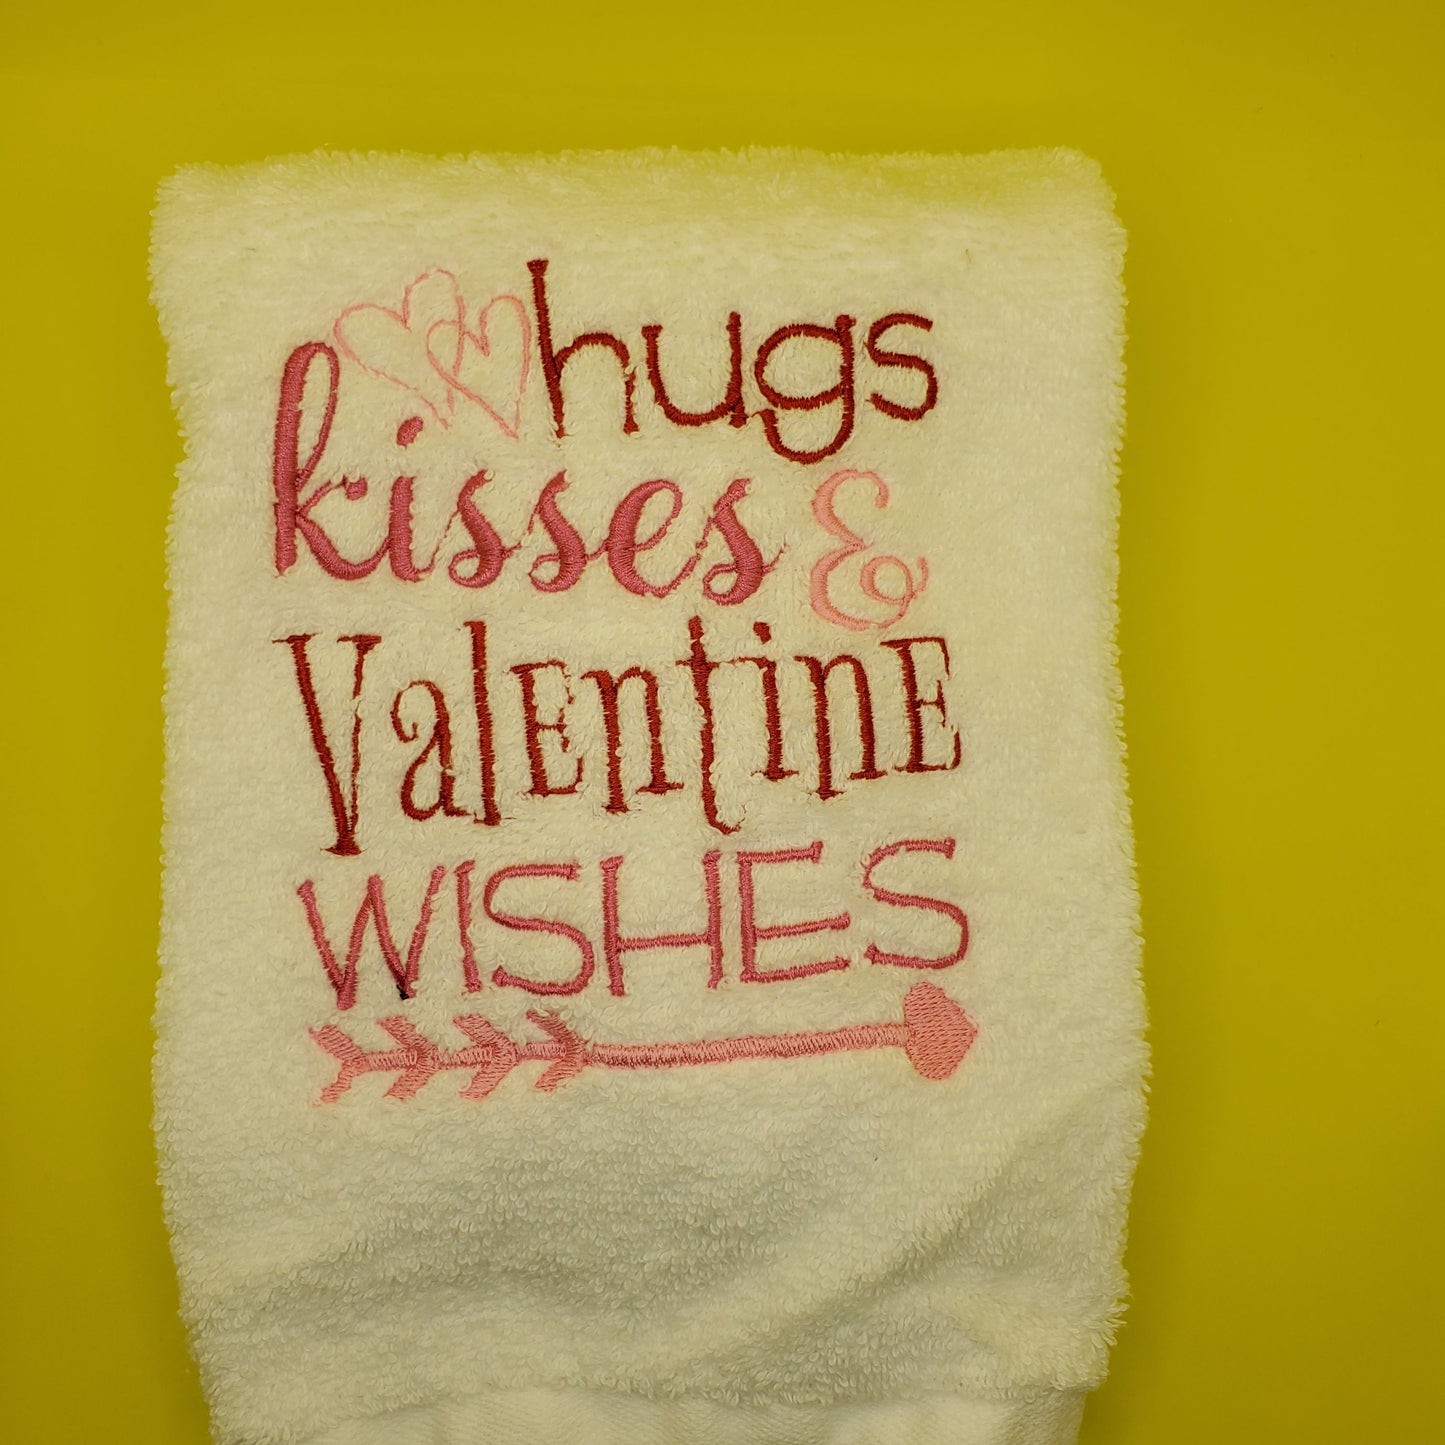 Hugs, Kisses and Valentine wishes